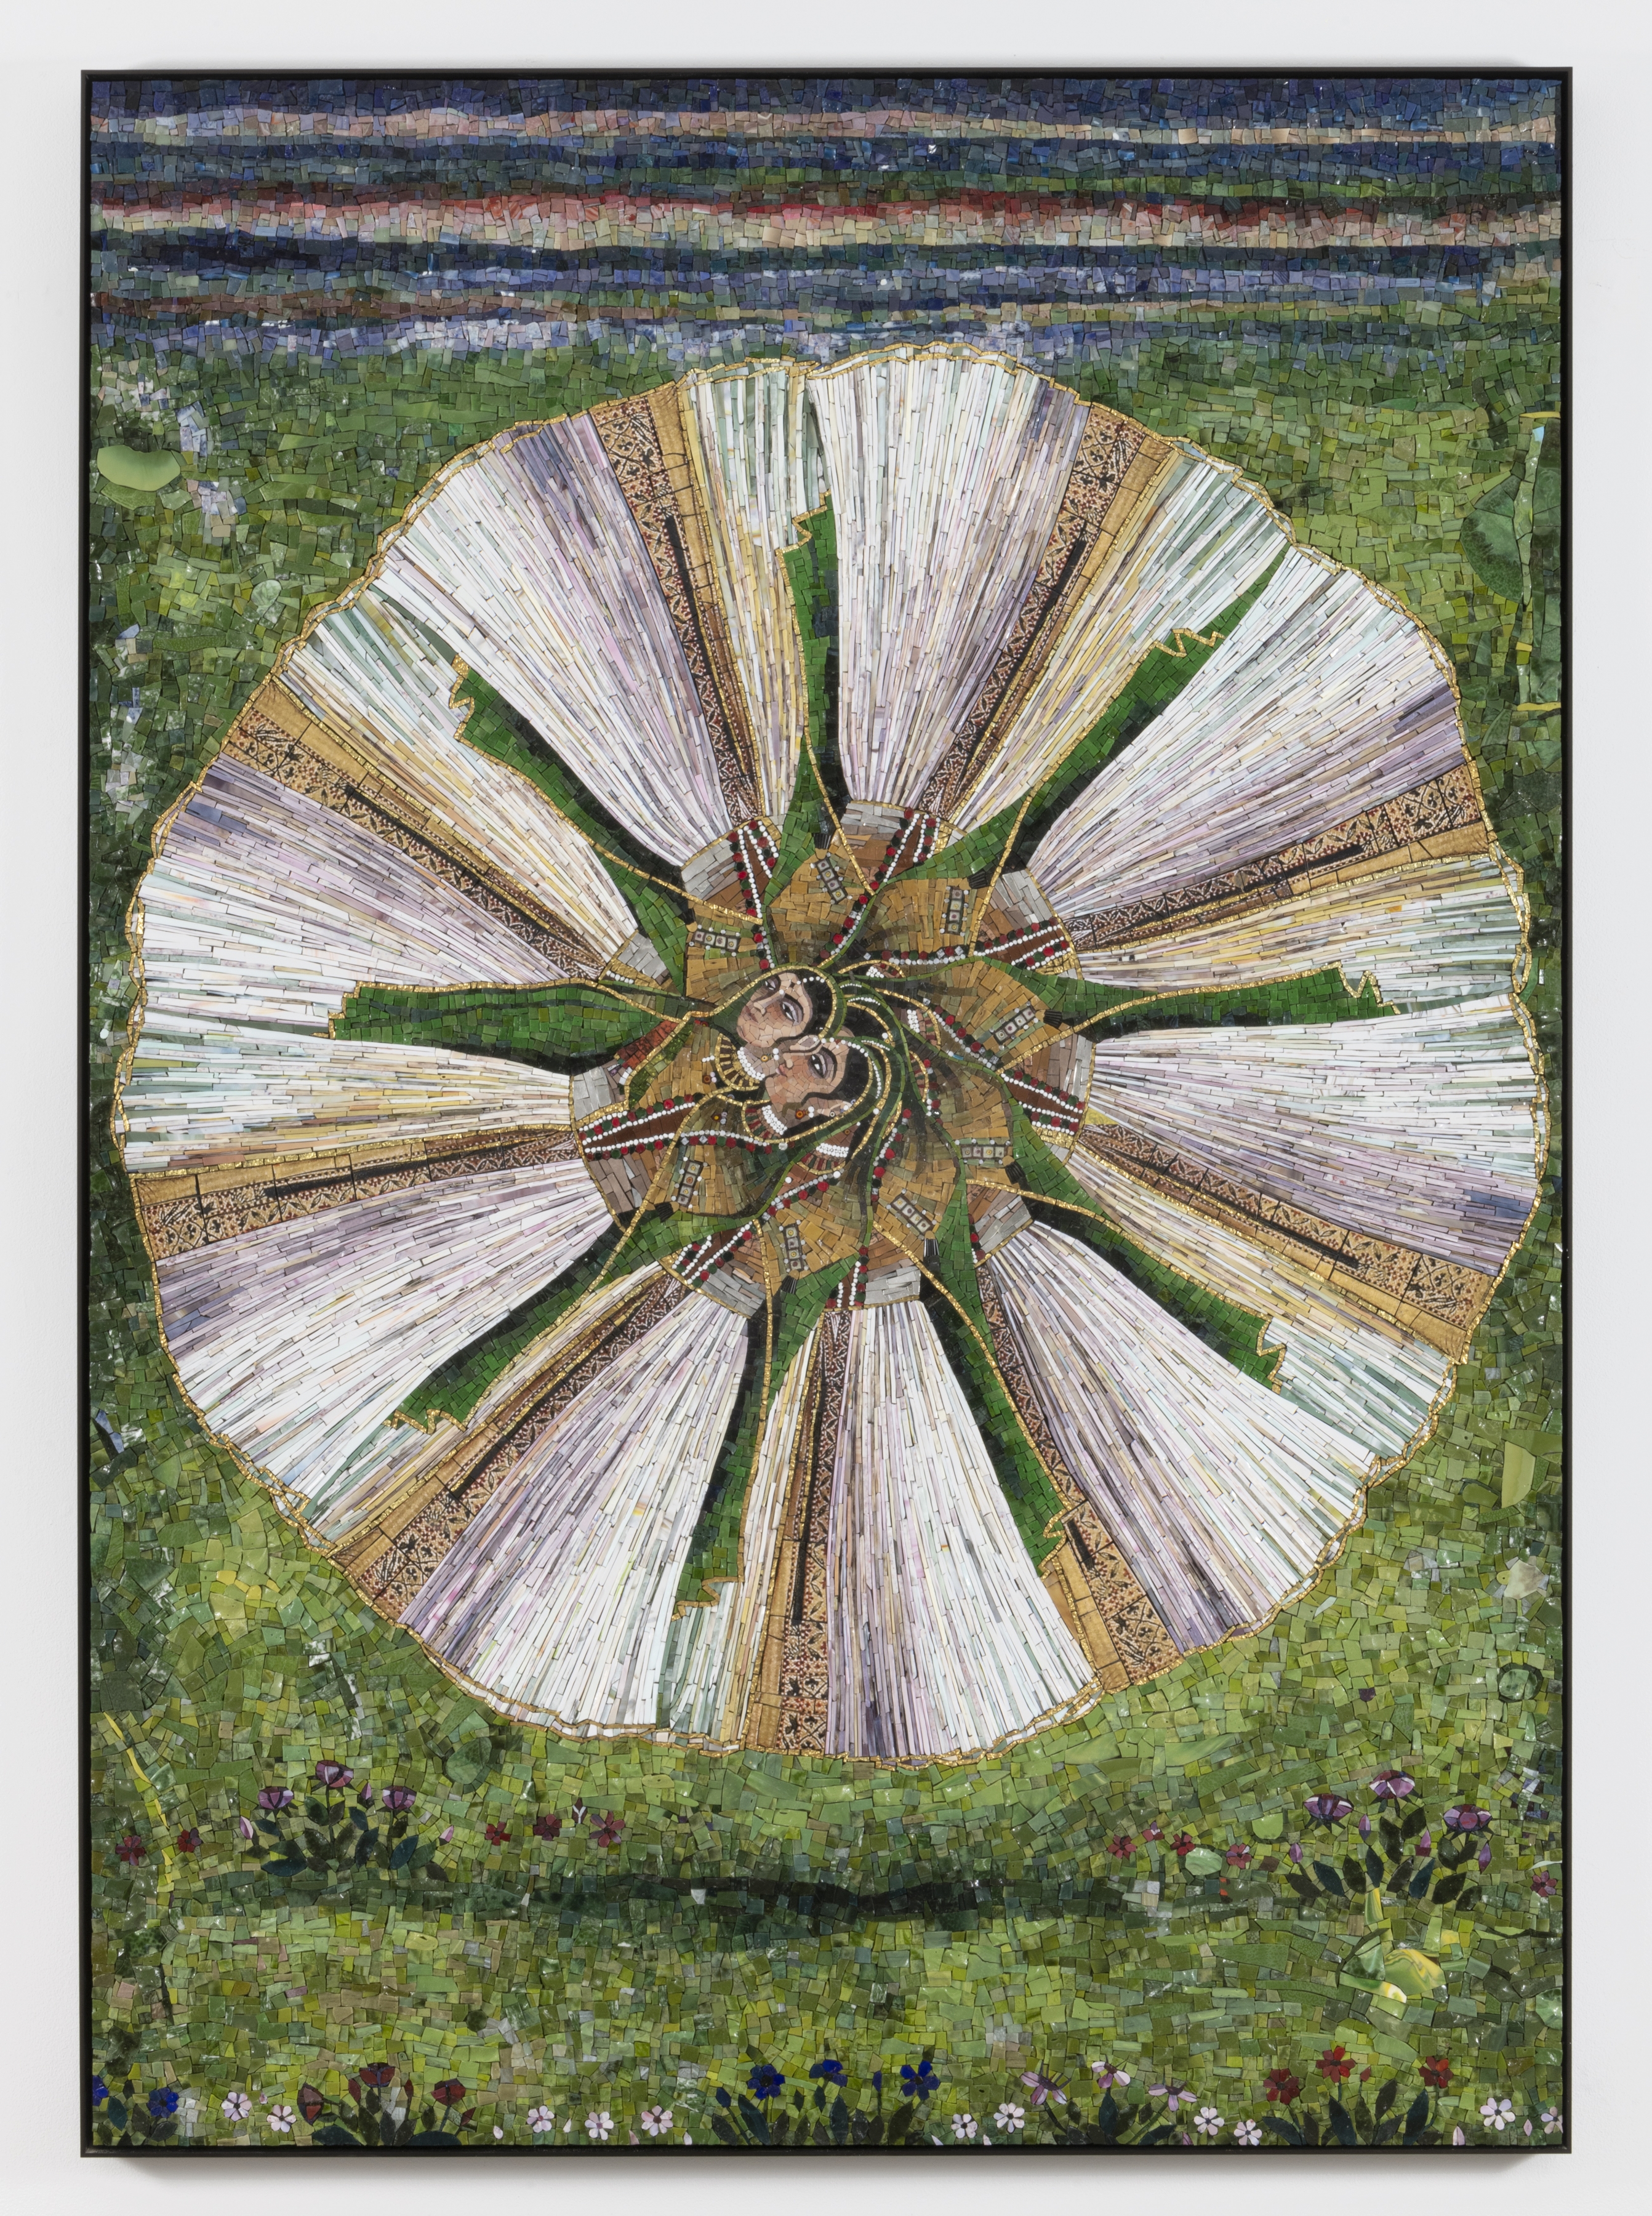 Arose, 2020

glass mosaic with patinated brass frame

mosaic: 83 1/8 x 59 7/8 inches (211.1 x 152.1 cm)

framed: 84 1/16 x 60 7/8 x 2 inches (213.5 x 154.6 x 5.1 cm)

edition of 5 with 2 APs

the work is accompanied by a signed certificate of authenticity